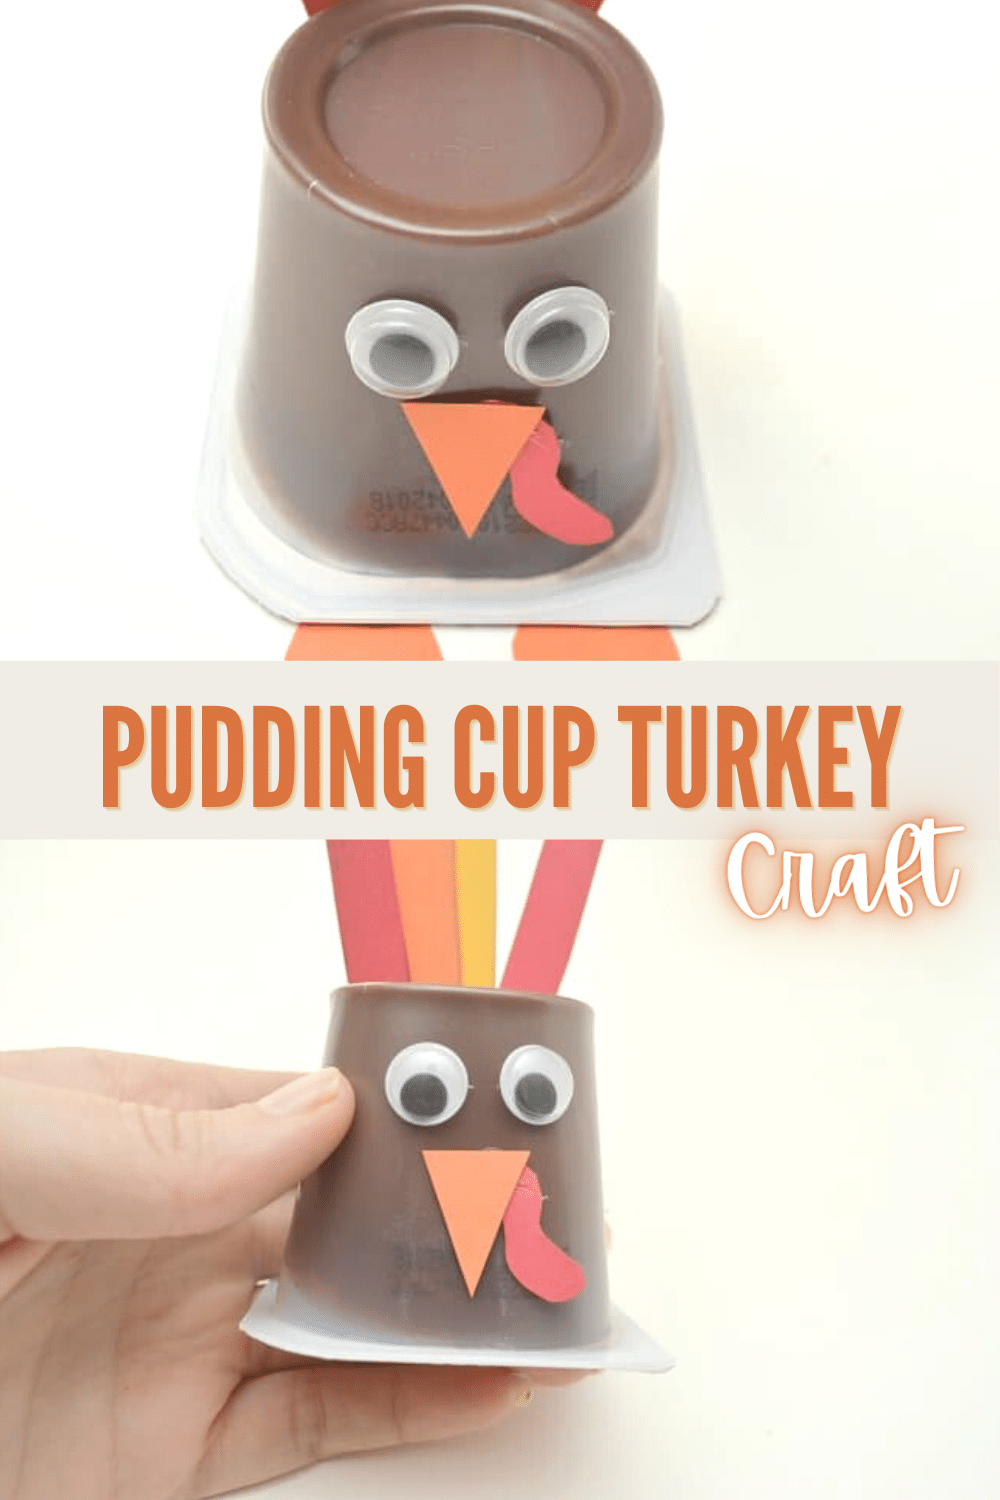 Thanksgiving pudding cup turkey craft is a delightful and fun activity for kids to create adorable turkeys using pudding cups.